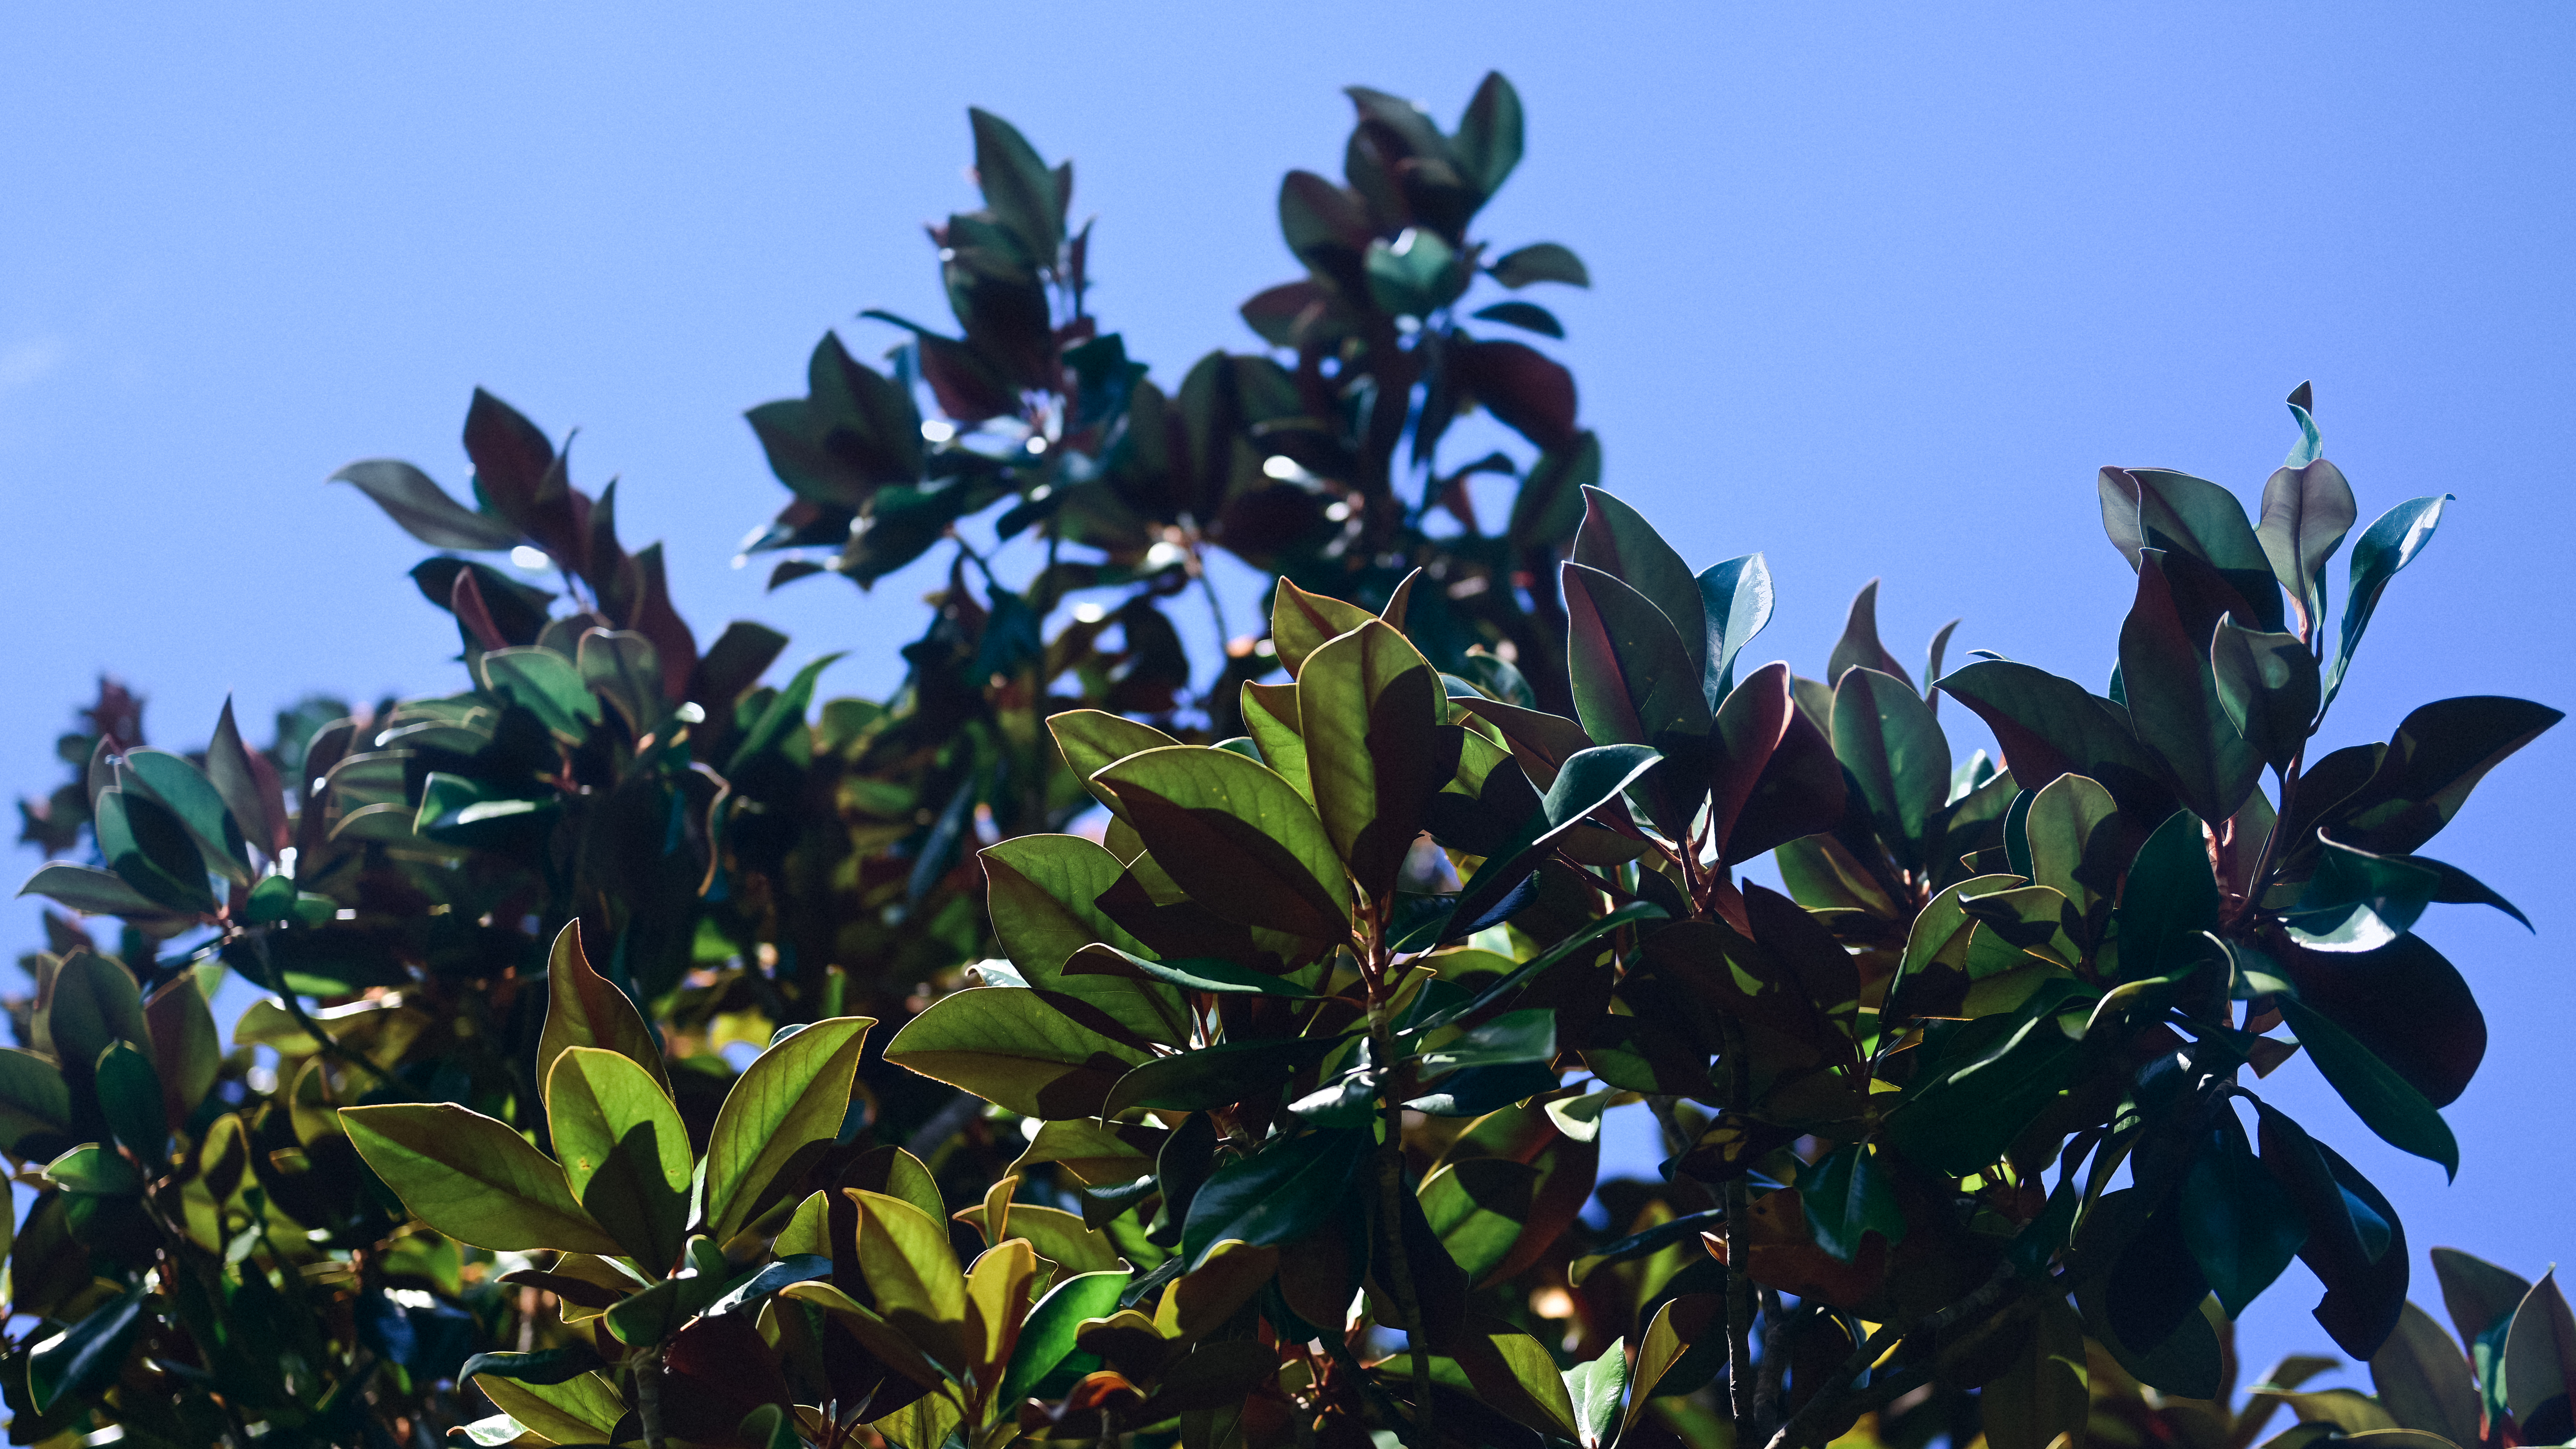 Nature Trees Magnolia Photography Plants Outdoors Leaves Perspective 50mm 5760x3240